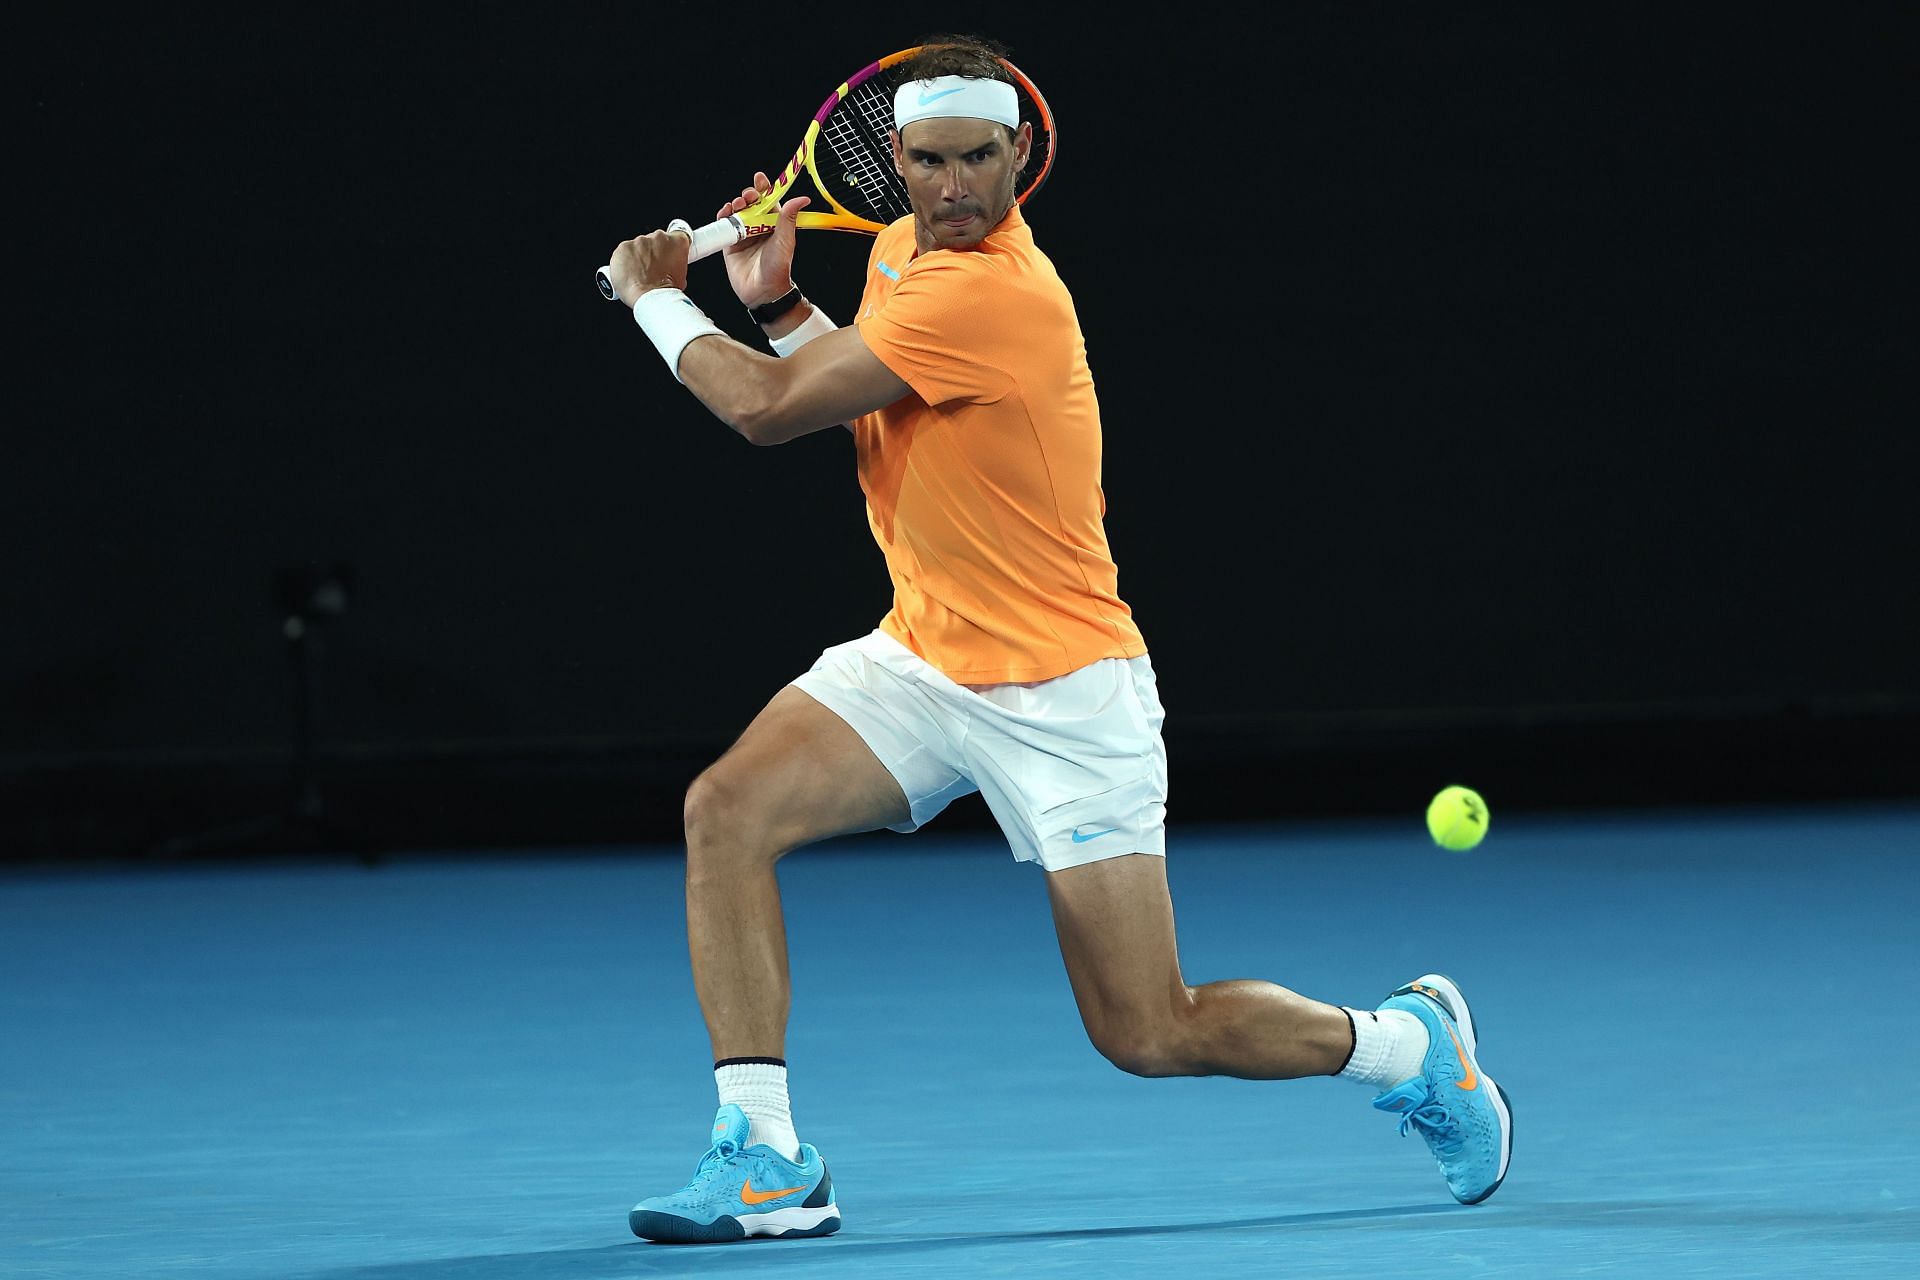 Rafael Nadal in action at the Australian Open